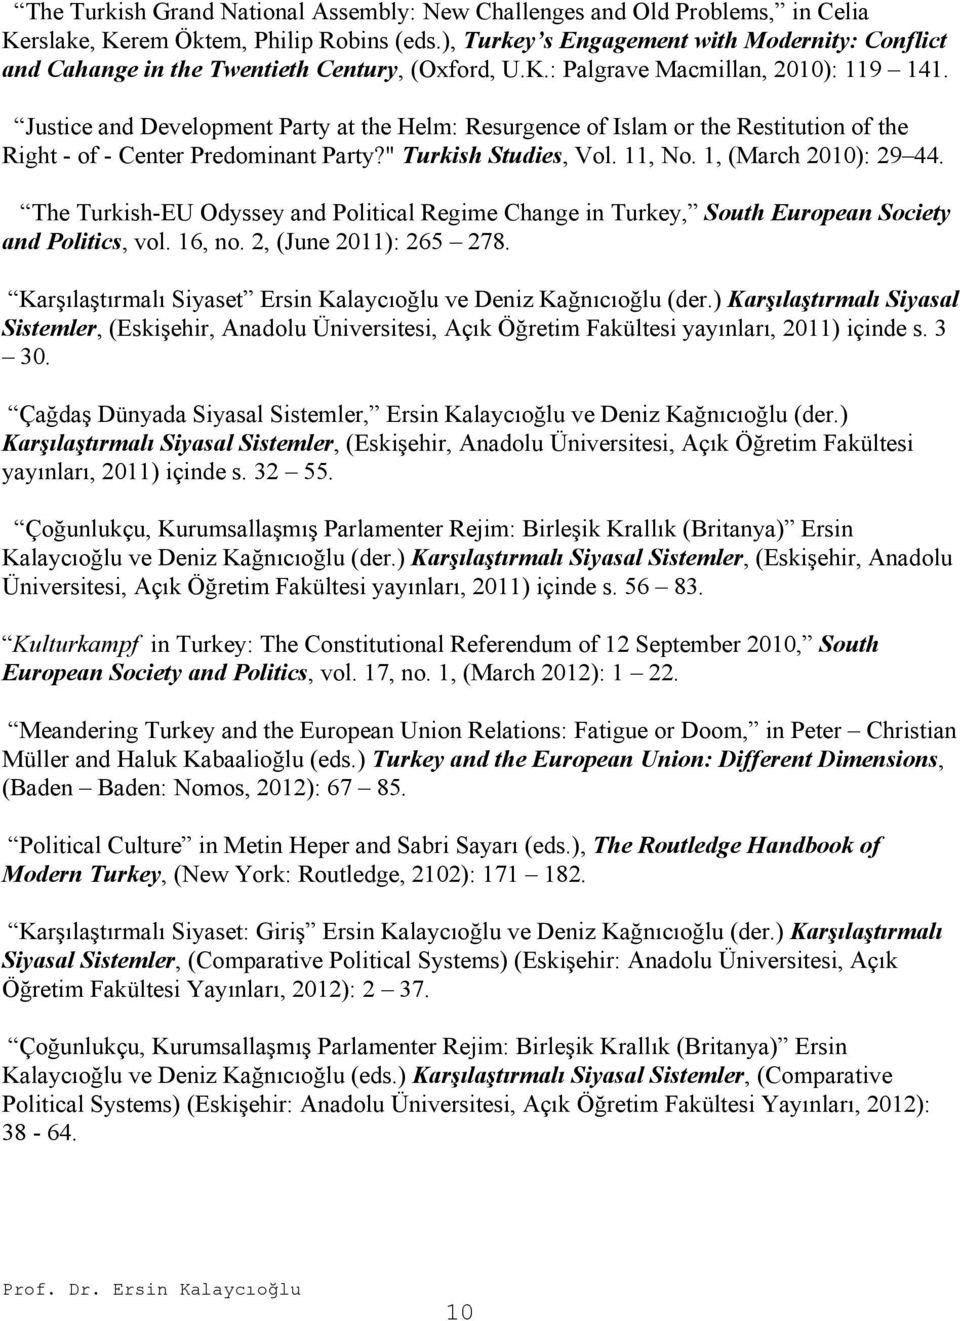 Justice and Development Party at the Helm: Resurgence of Islam or the Restitution of the Right - of - Center Predominant Party?" Turkish Studies, Vol. 11, No. 1, (March 2010): 29 44.